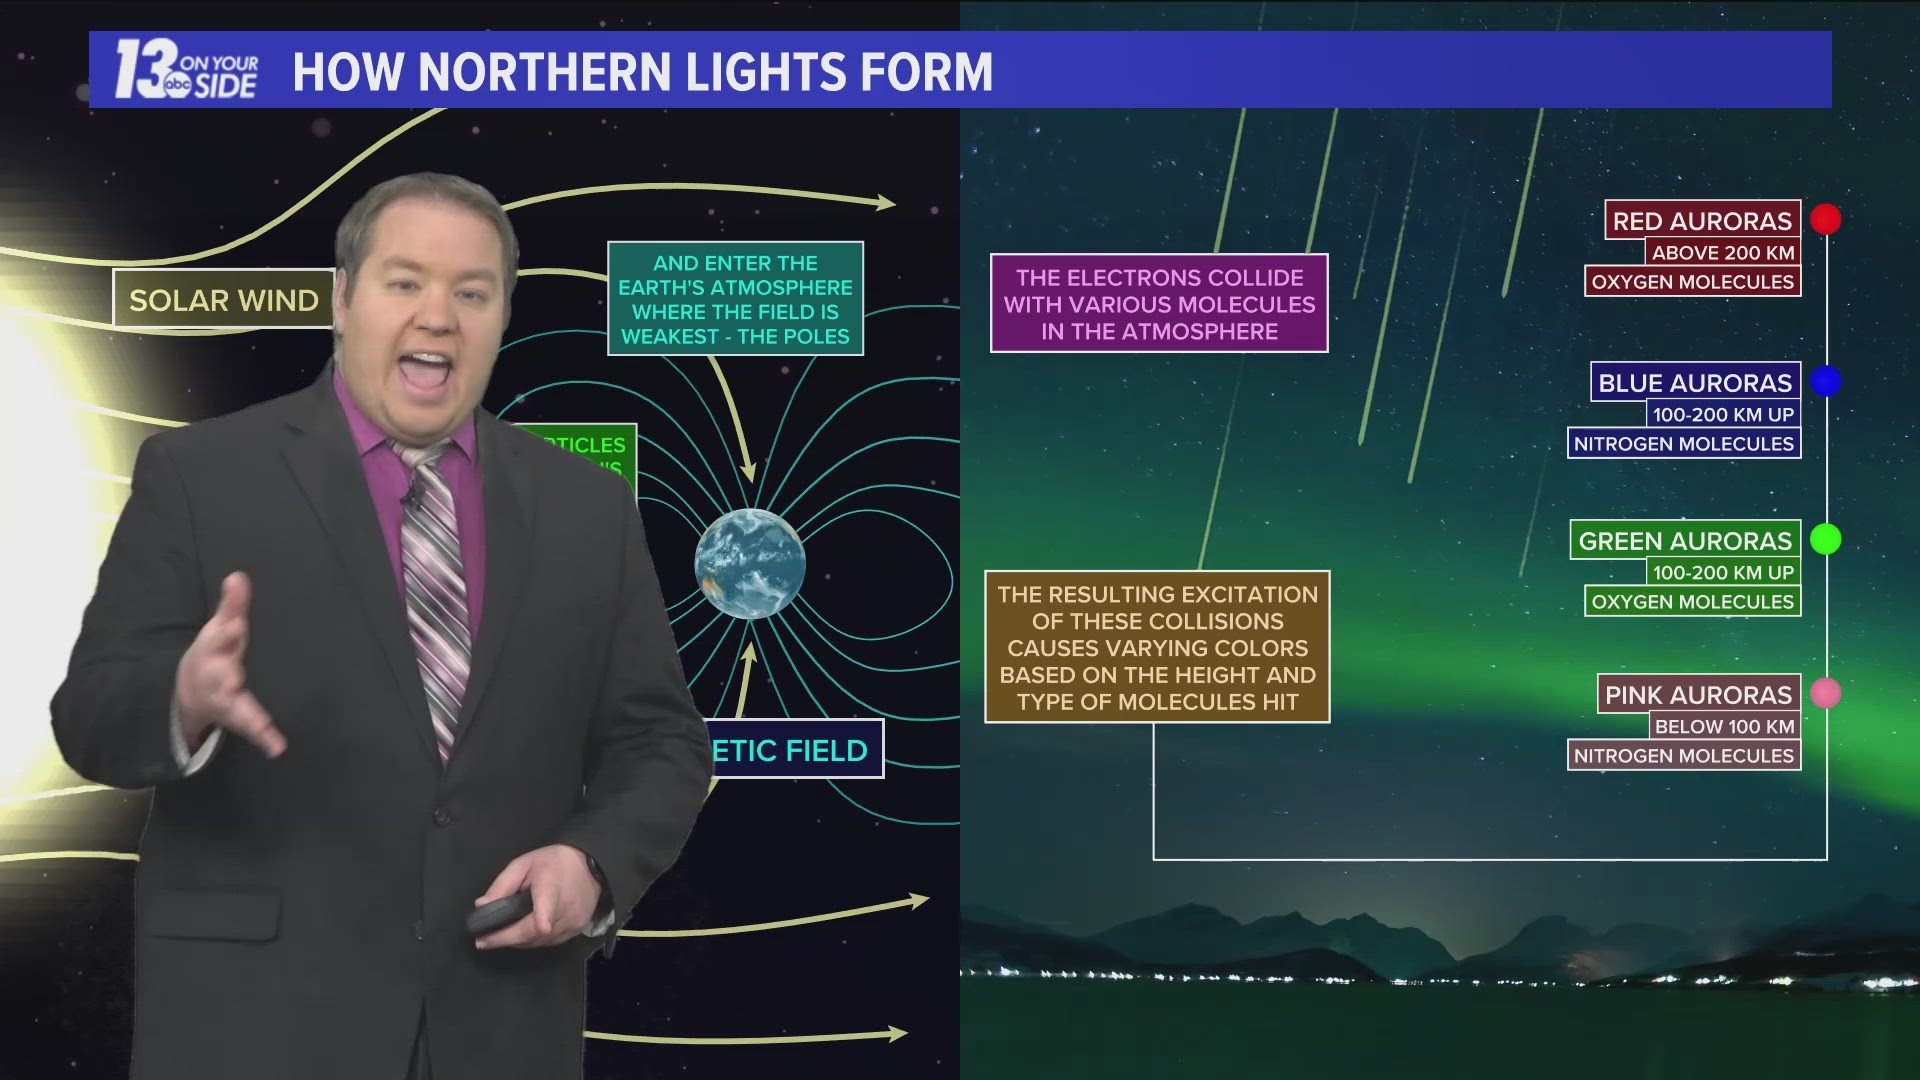 Ever wonder why we get the northern lights here on earth? Meteorologist Michael Behrens explains why!